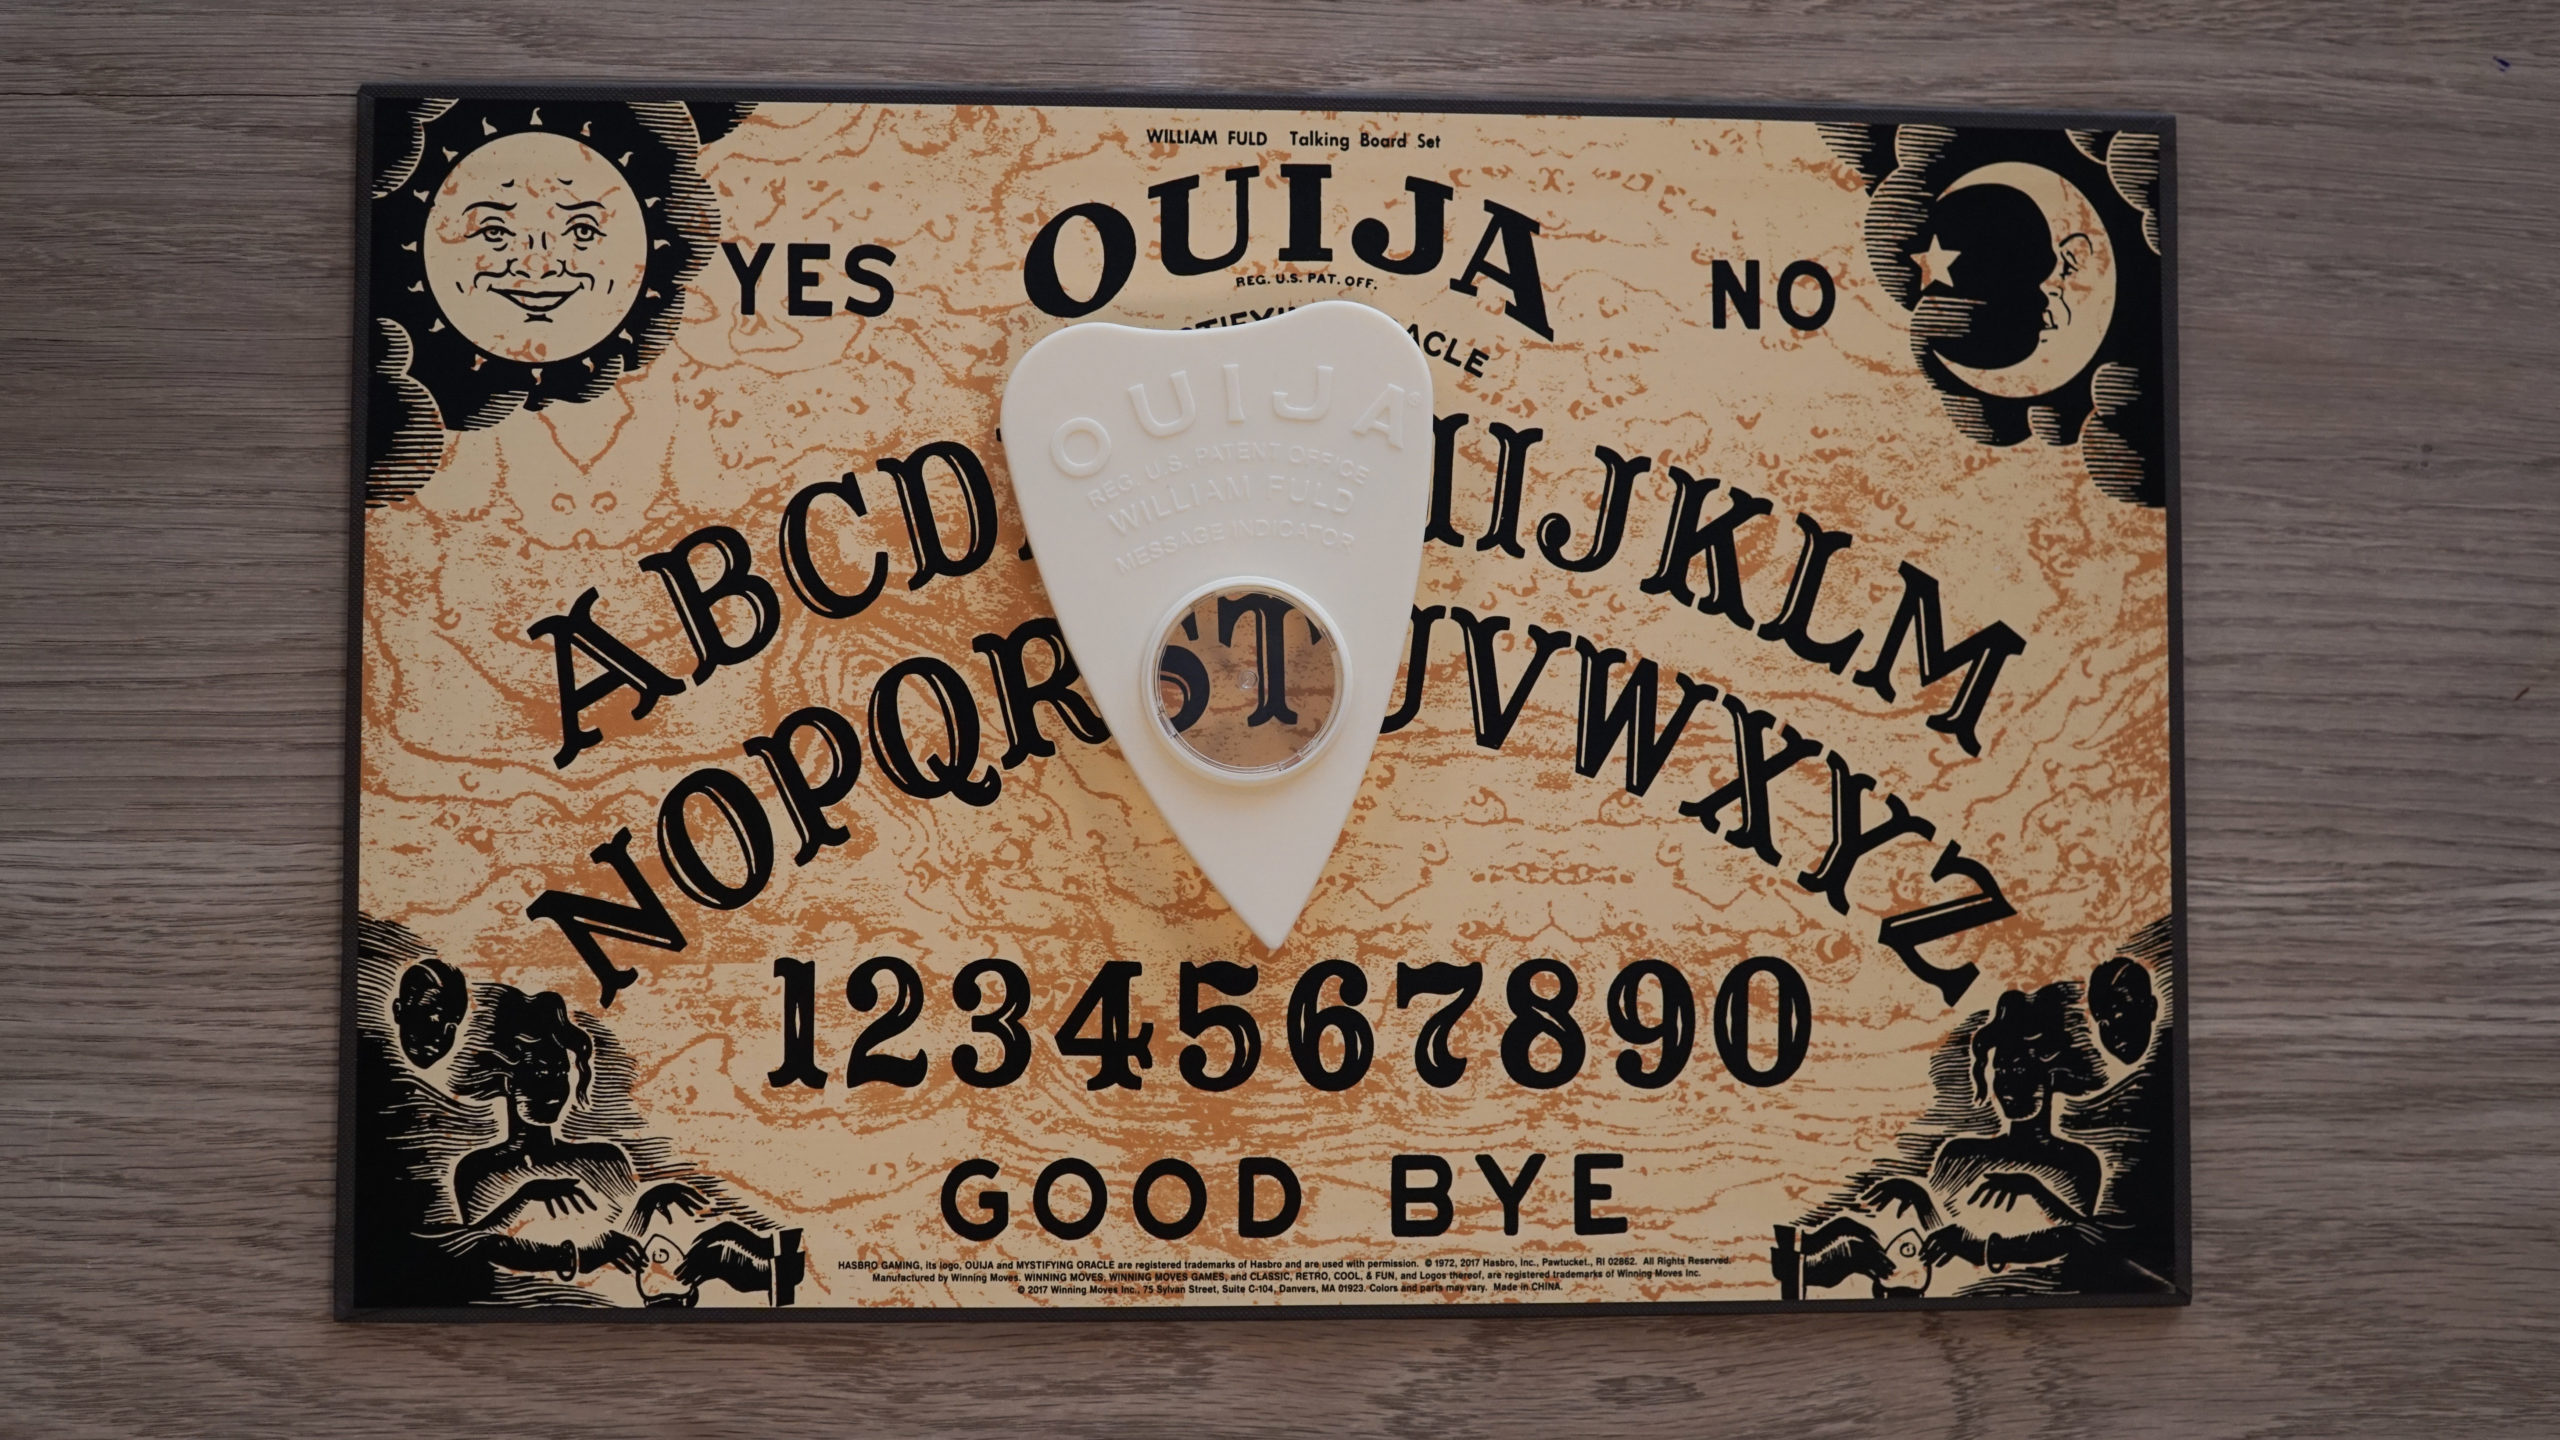 The Real Fakery Of The Ouija Board